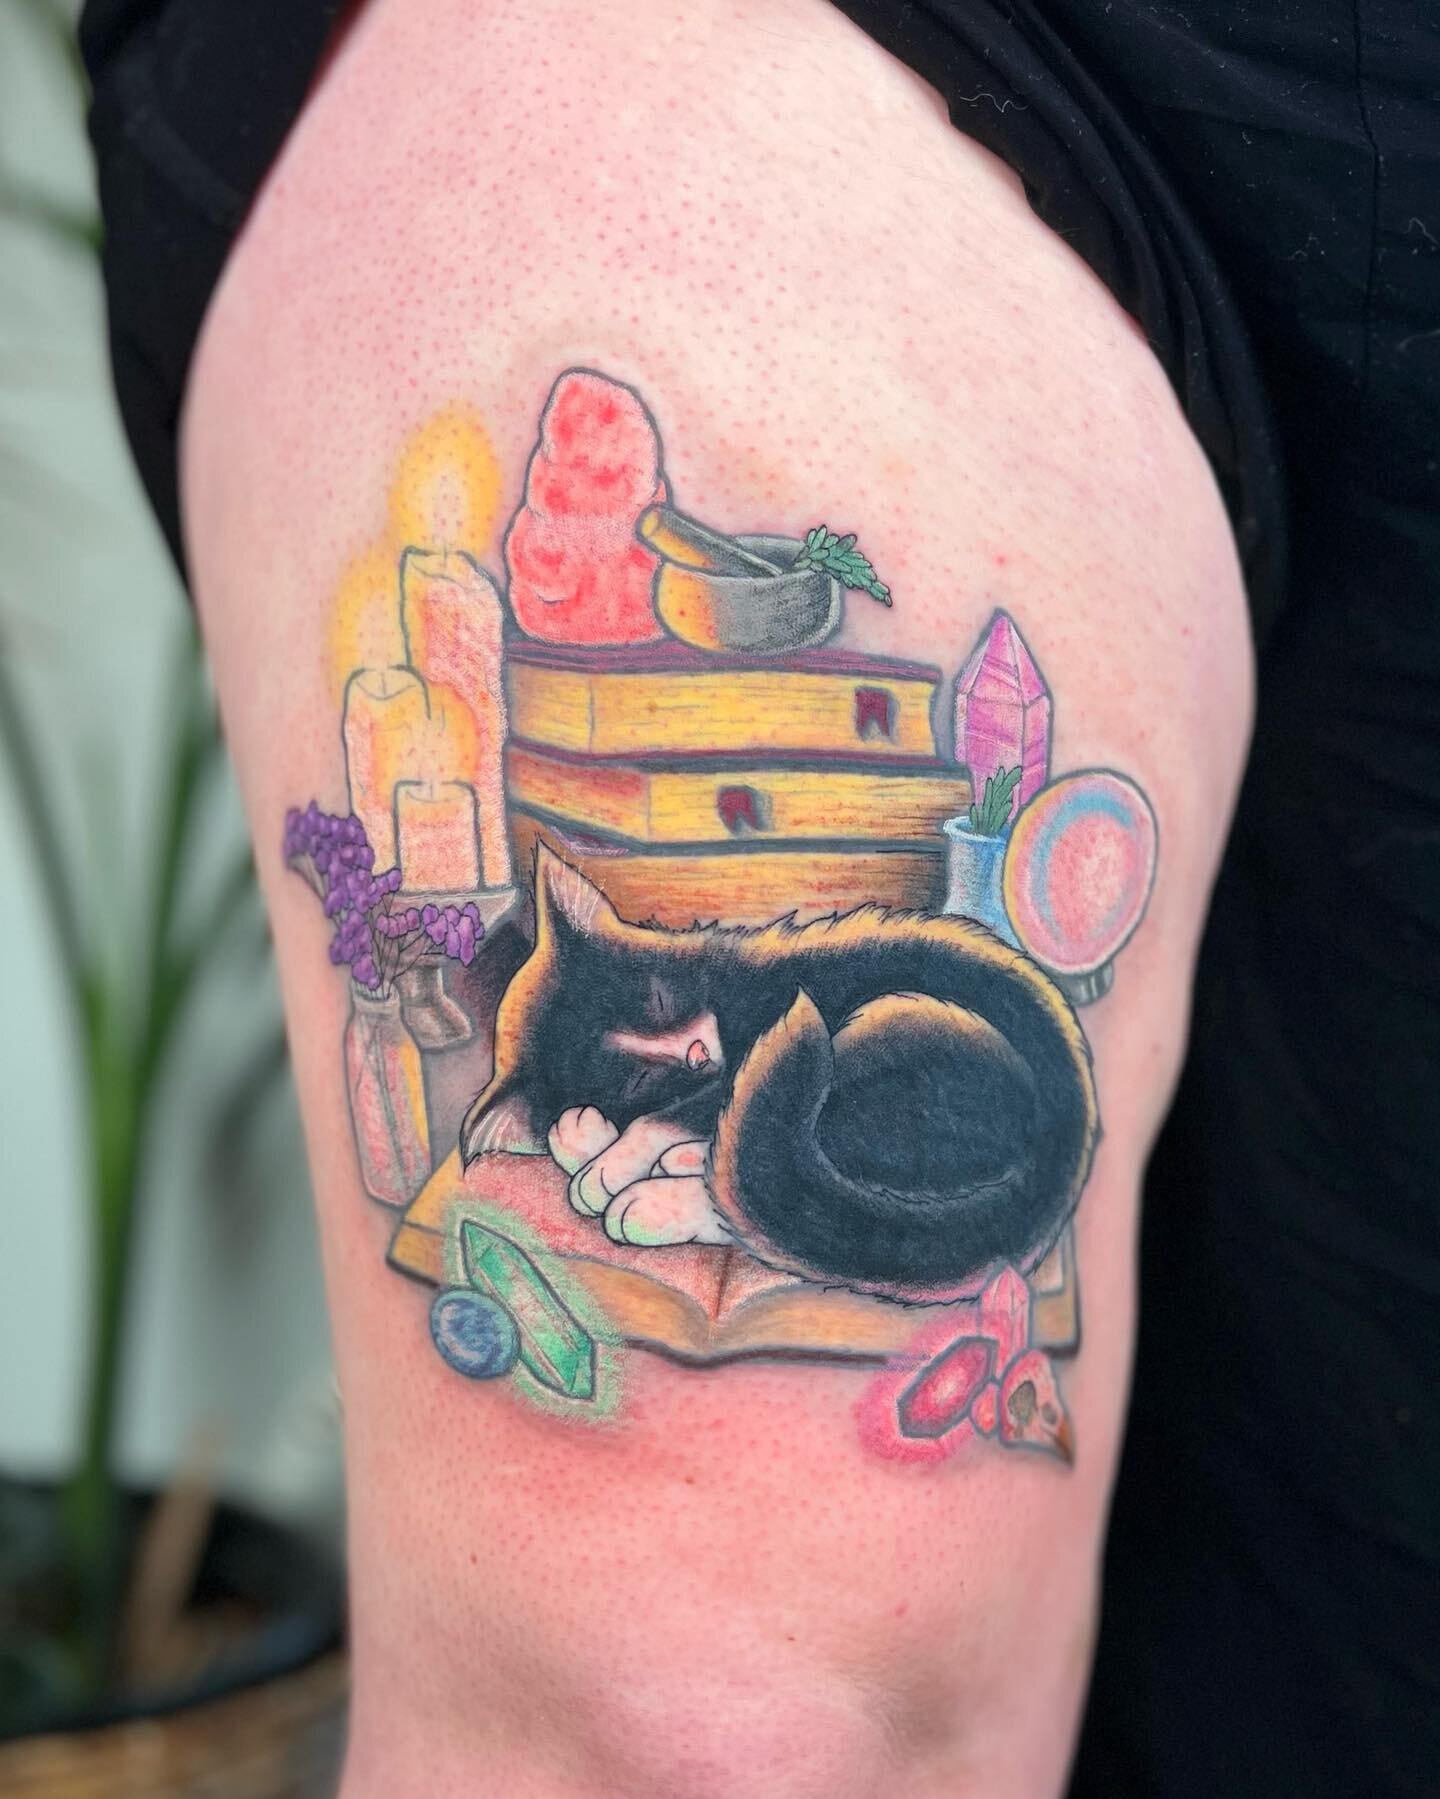 Mystical kitty (some healed / some fresh)
Finally finished this piece that we started in 2019! Had so much fun with this. Thanks for sitting like a boss, Tara!
&bull;
#RayCorsonTattoo 
#DallasTattooArtist 
#TexasTattoos
#FemaleTattooer 
#CatTattoo 
#